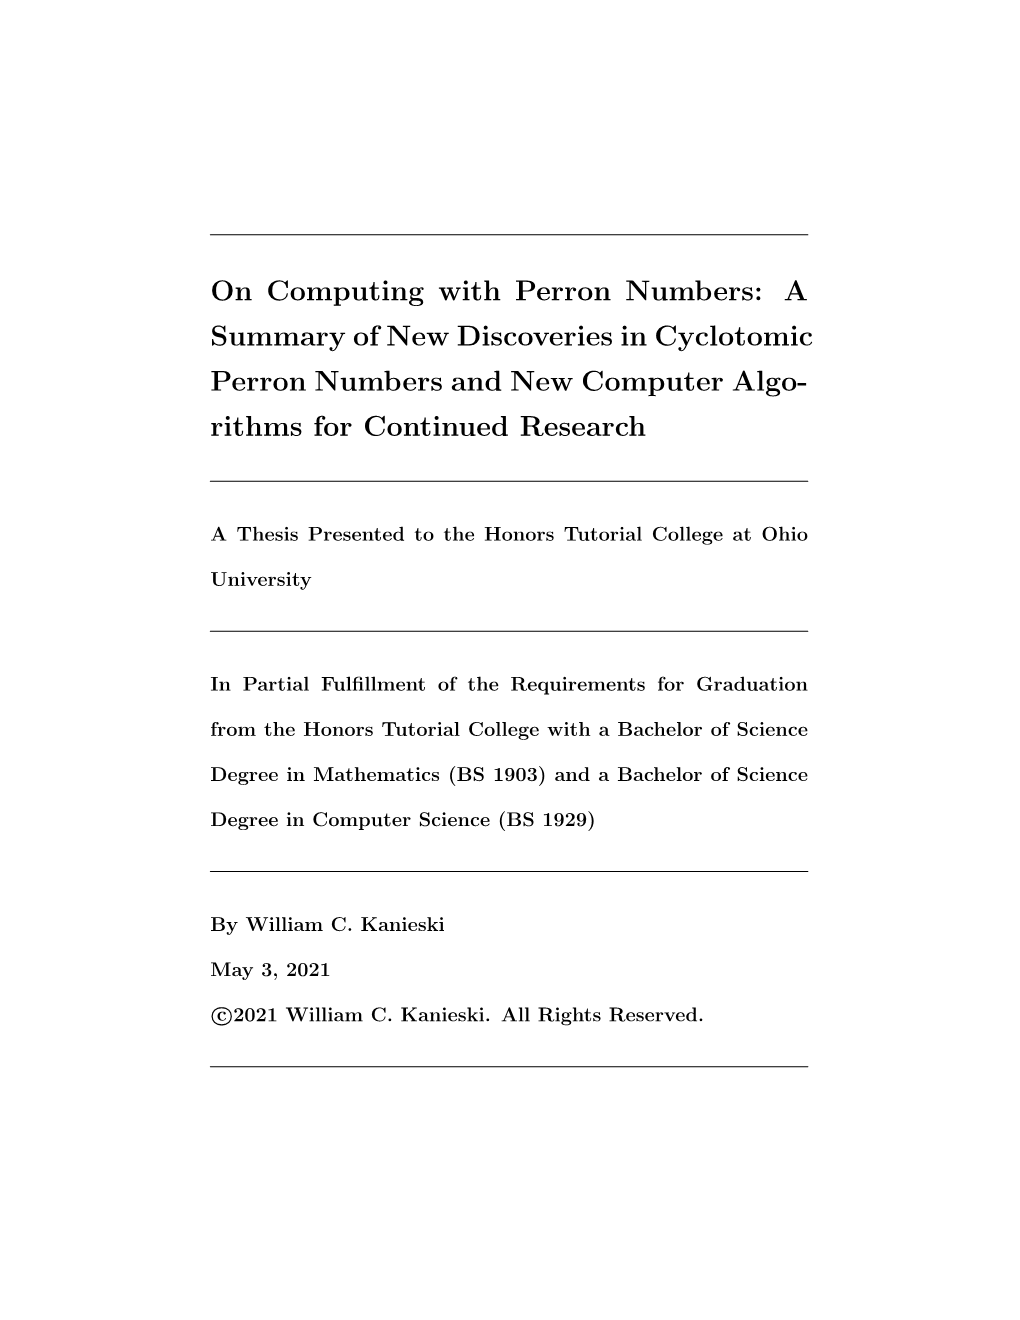 On Computing with Perron Numbers: a Summary of New Discoveries in Cyclotomic Perron Numbers and New Computer Algo- Rithms for Continued Research